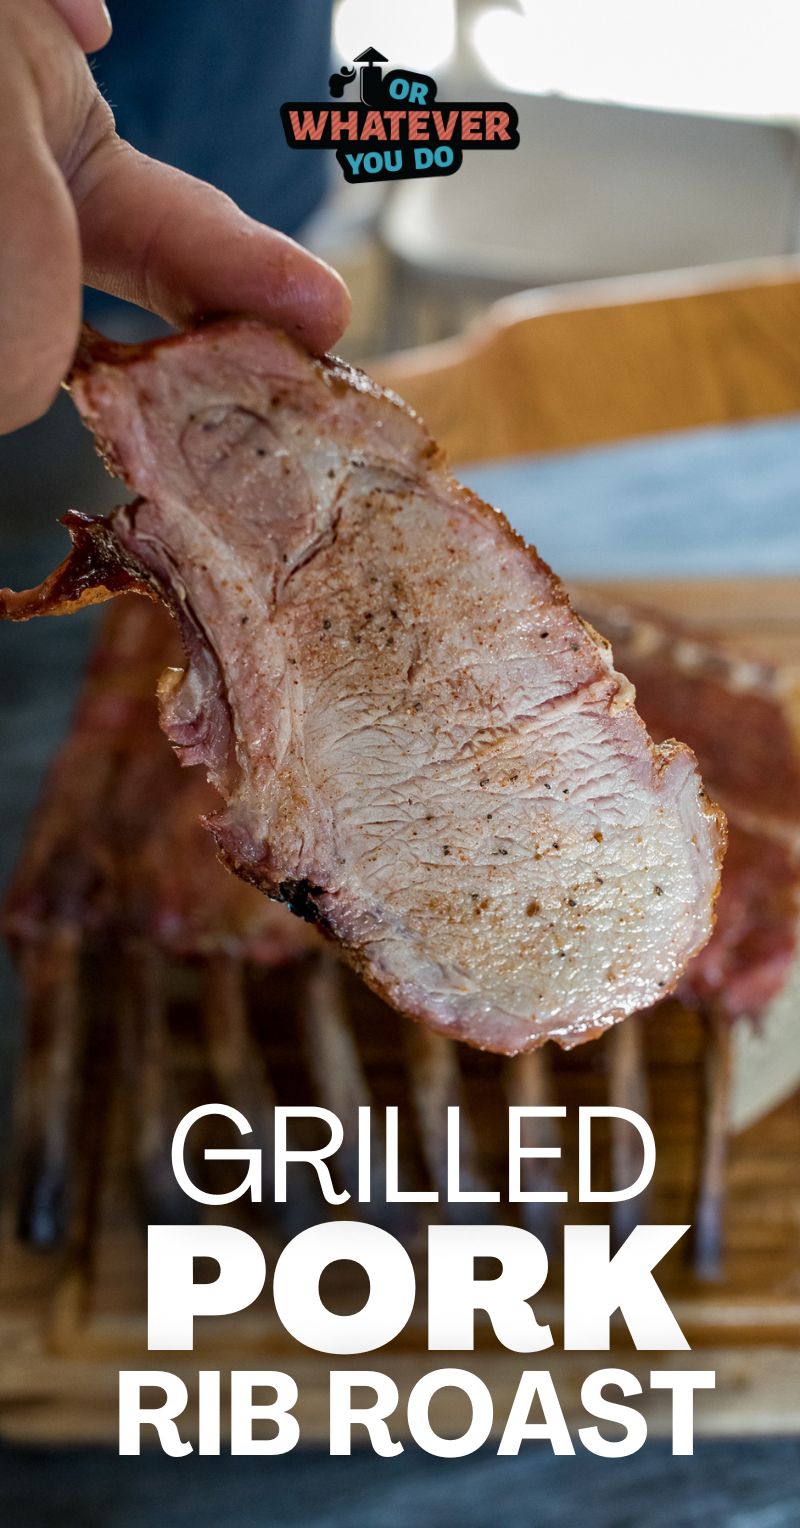 Grilled Rack of Pork – Or Whatever You Do